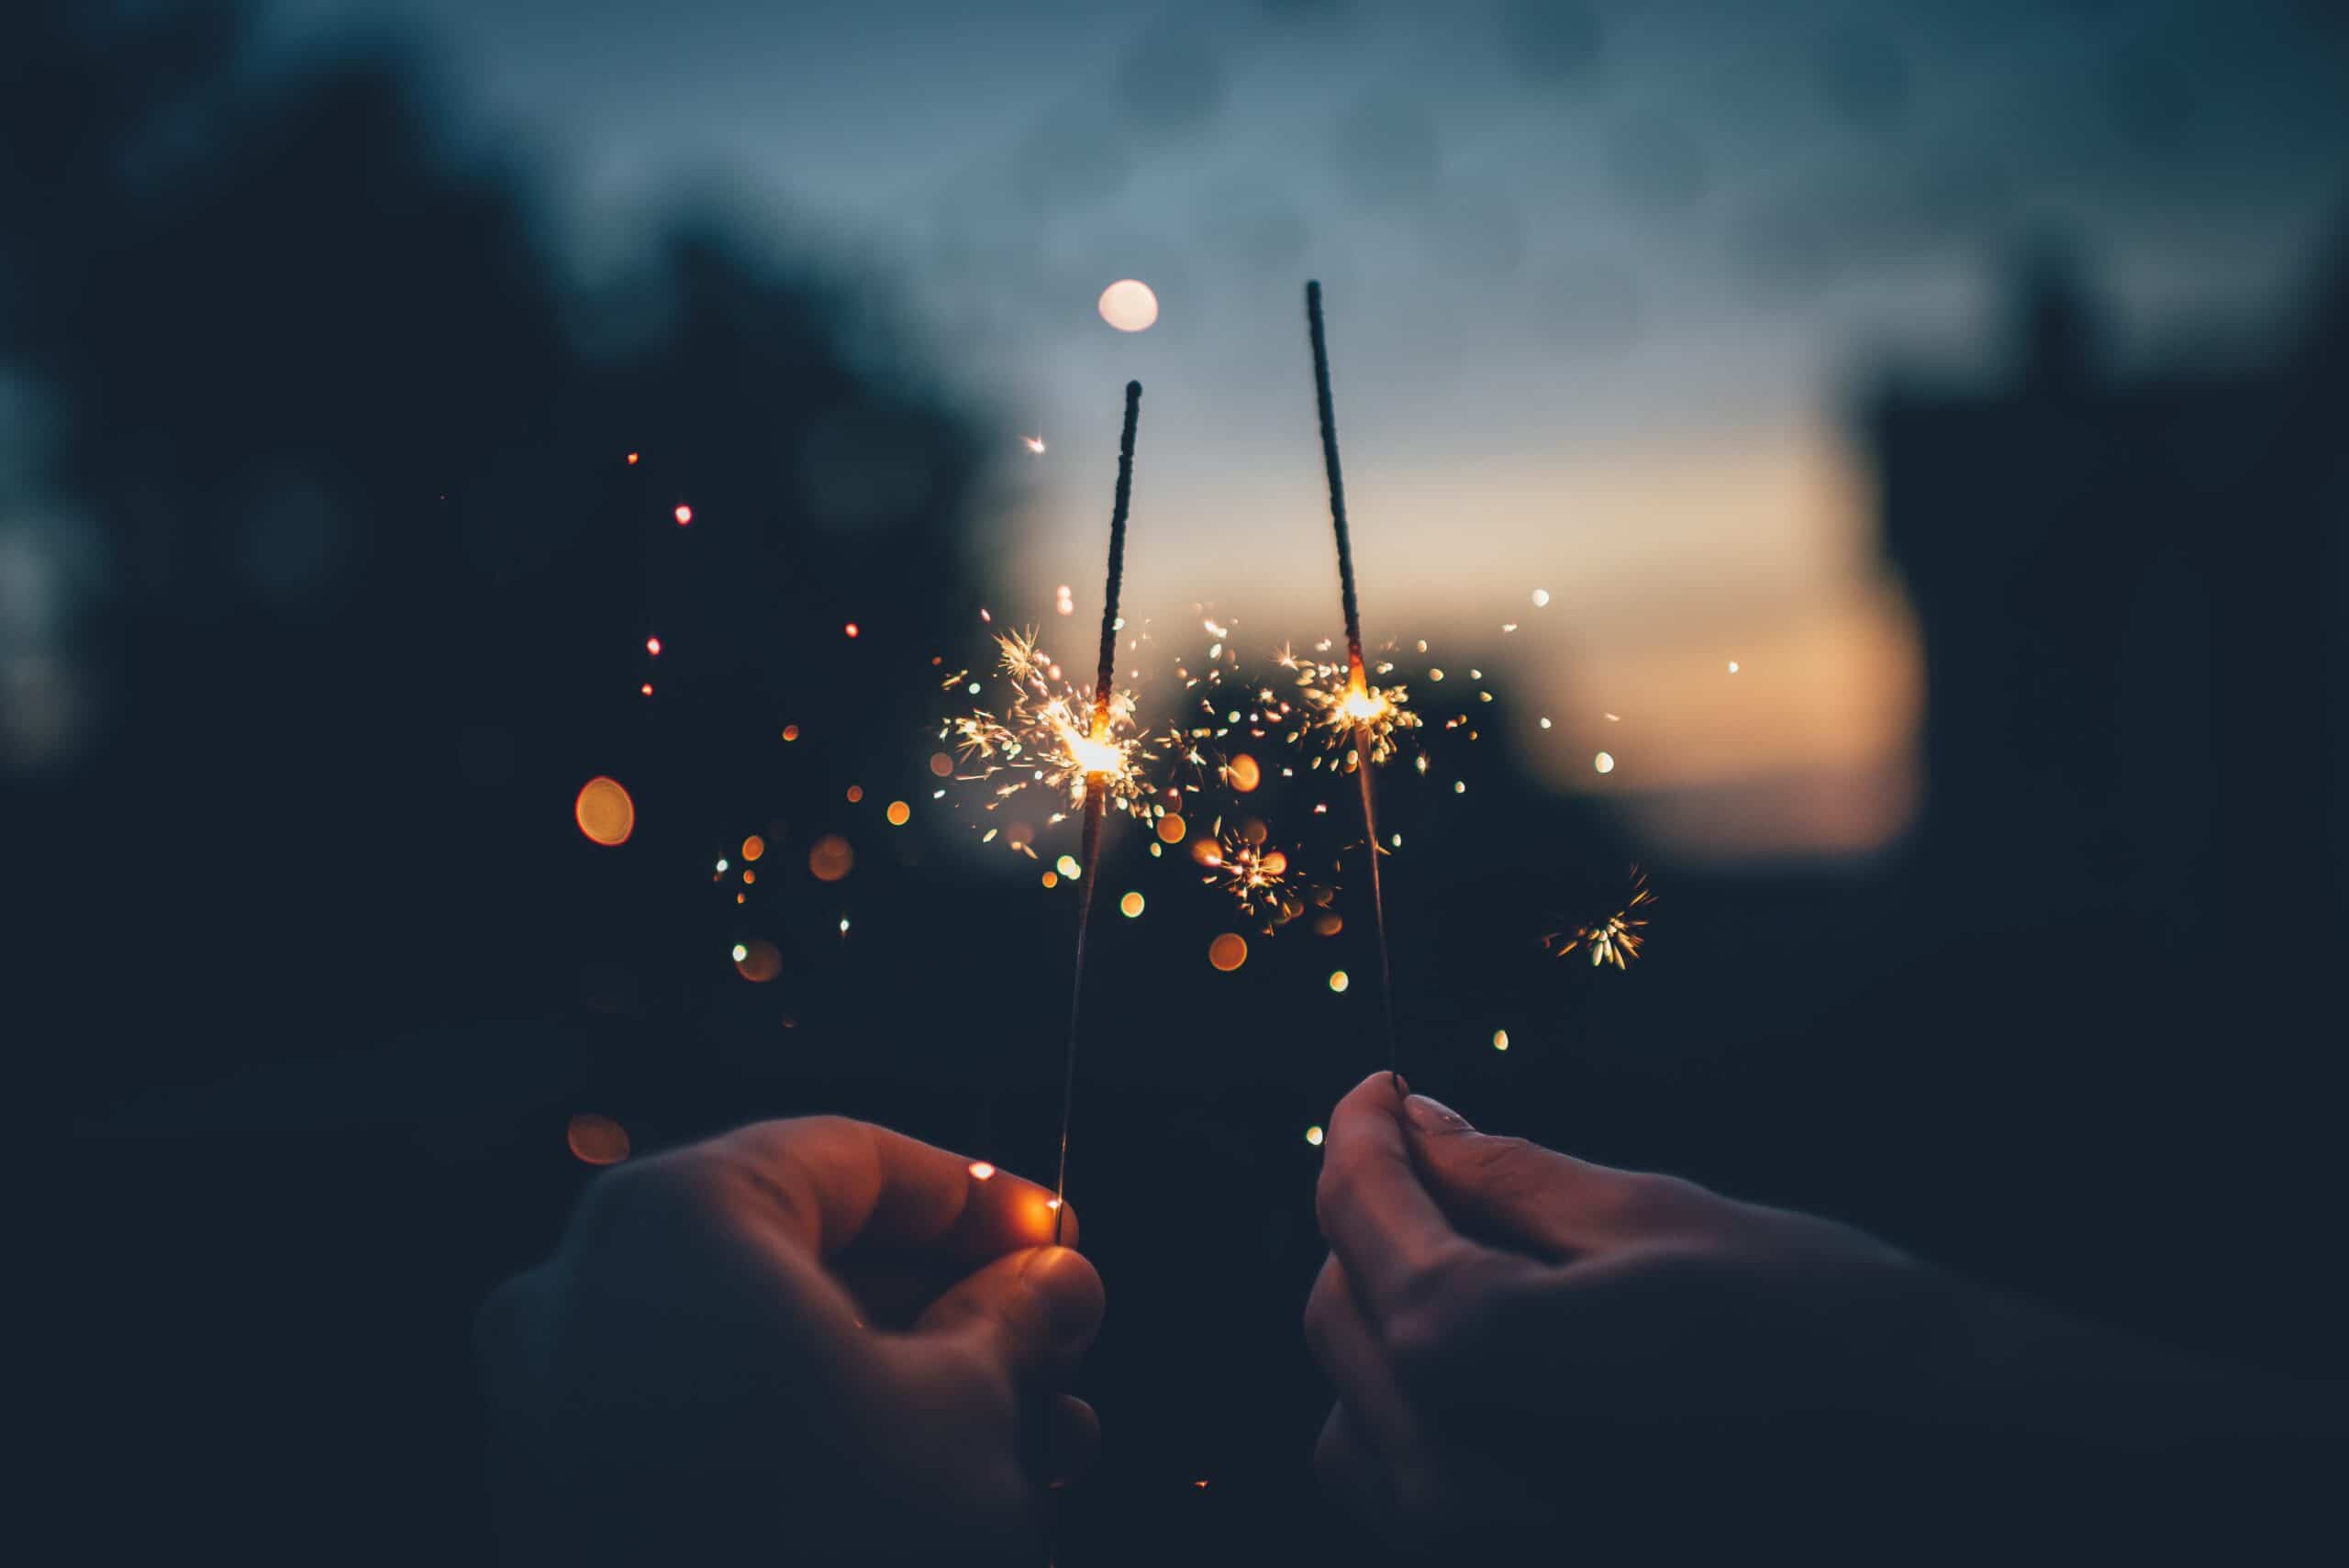 two hands holding sparklers at dusk